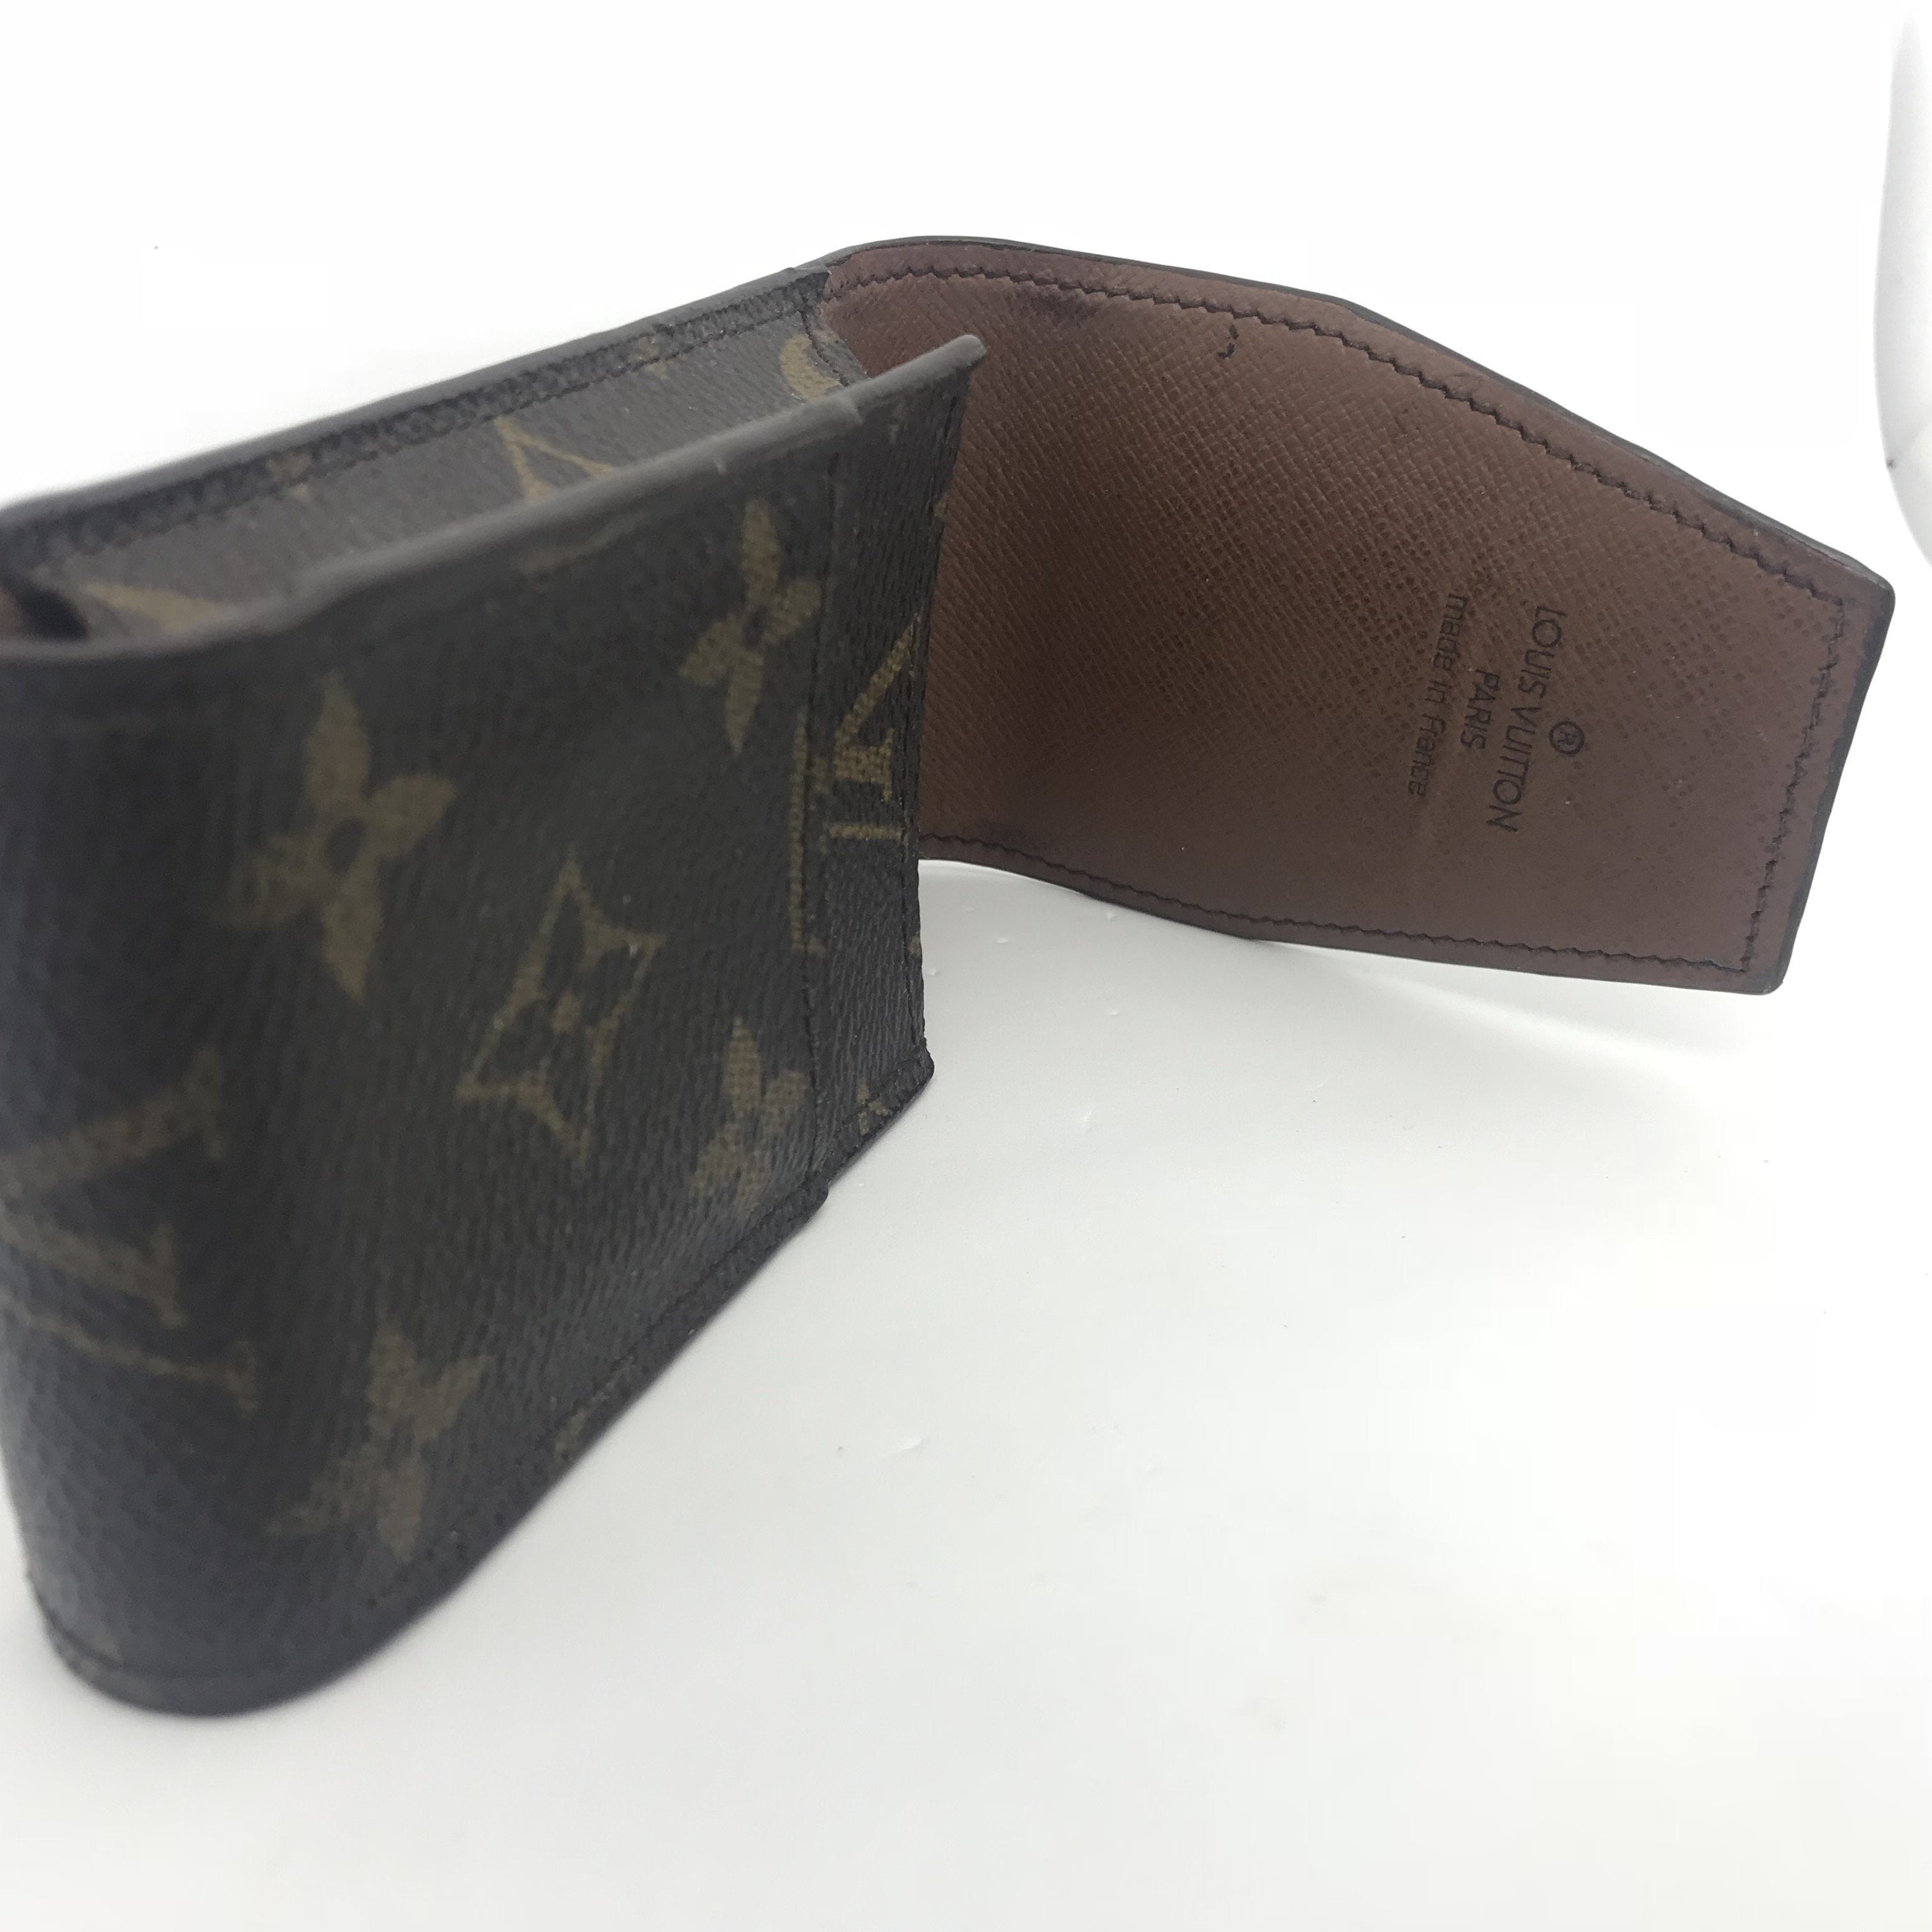 Louis Vuitton Monogram Brown Leather Card Holder Case for iPhone